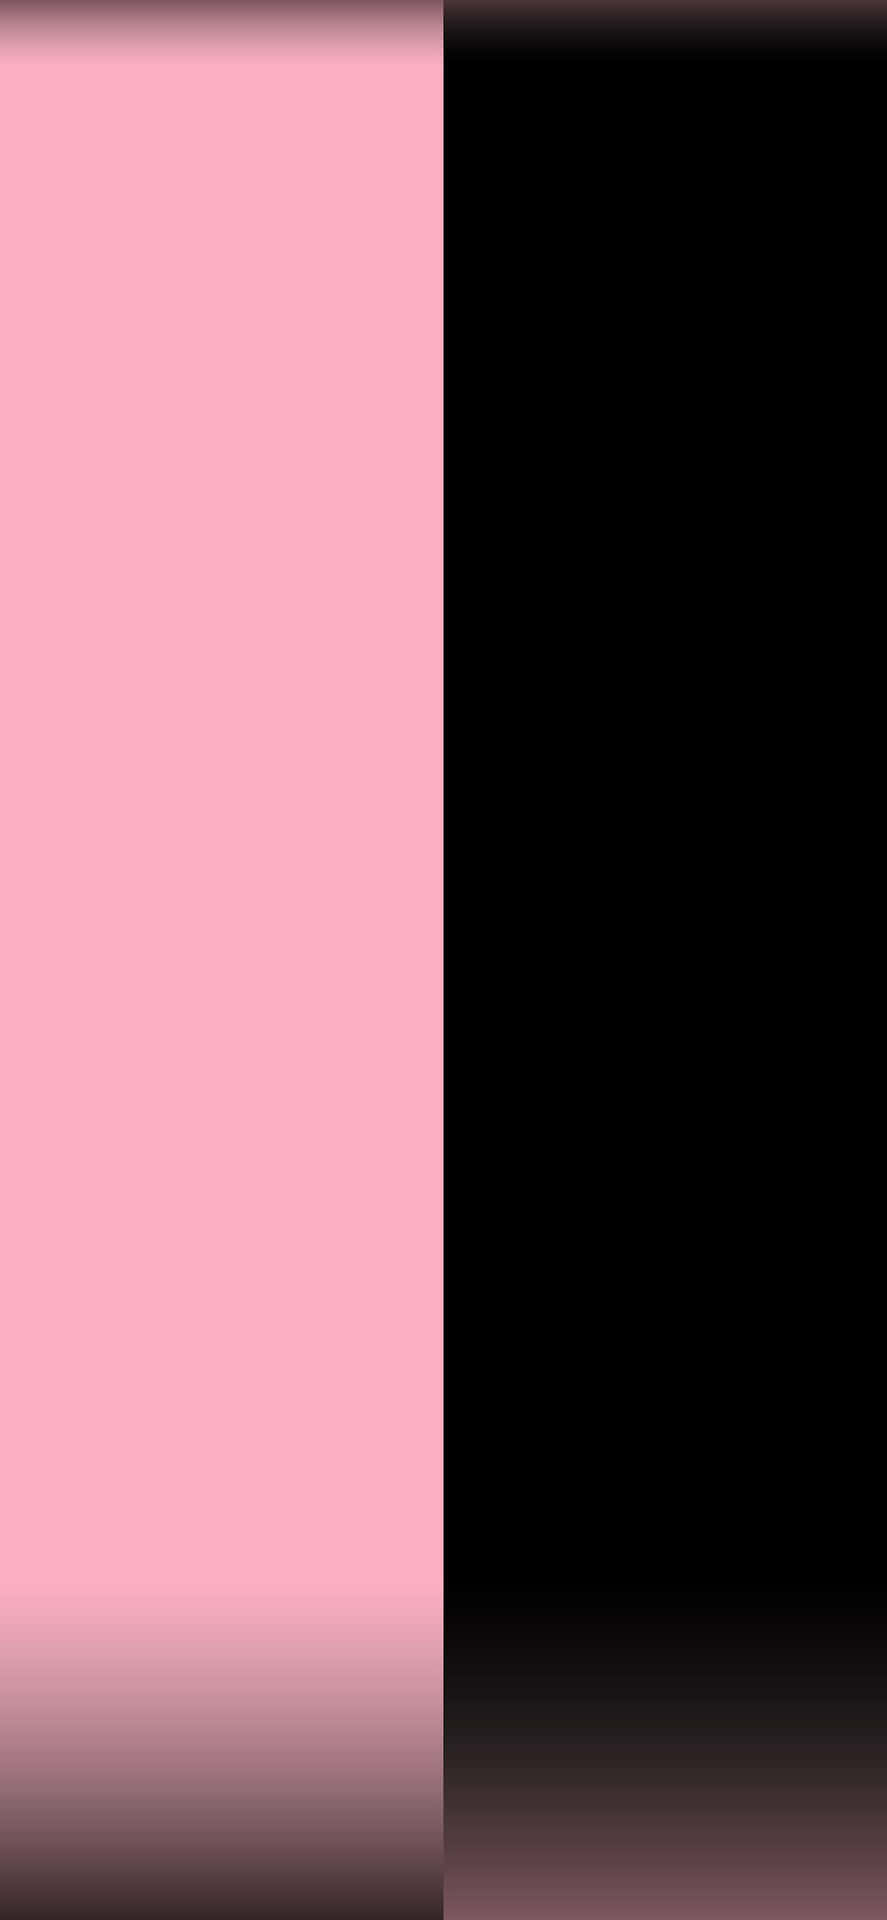 Black And Pink Vertical Iphone Wallpaper